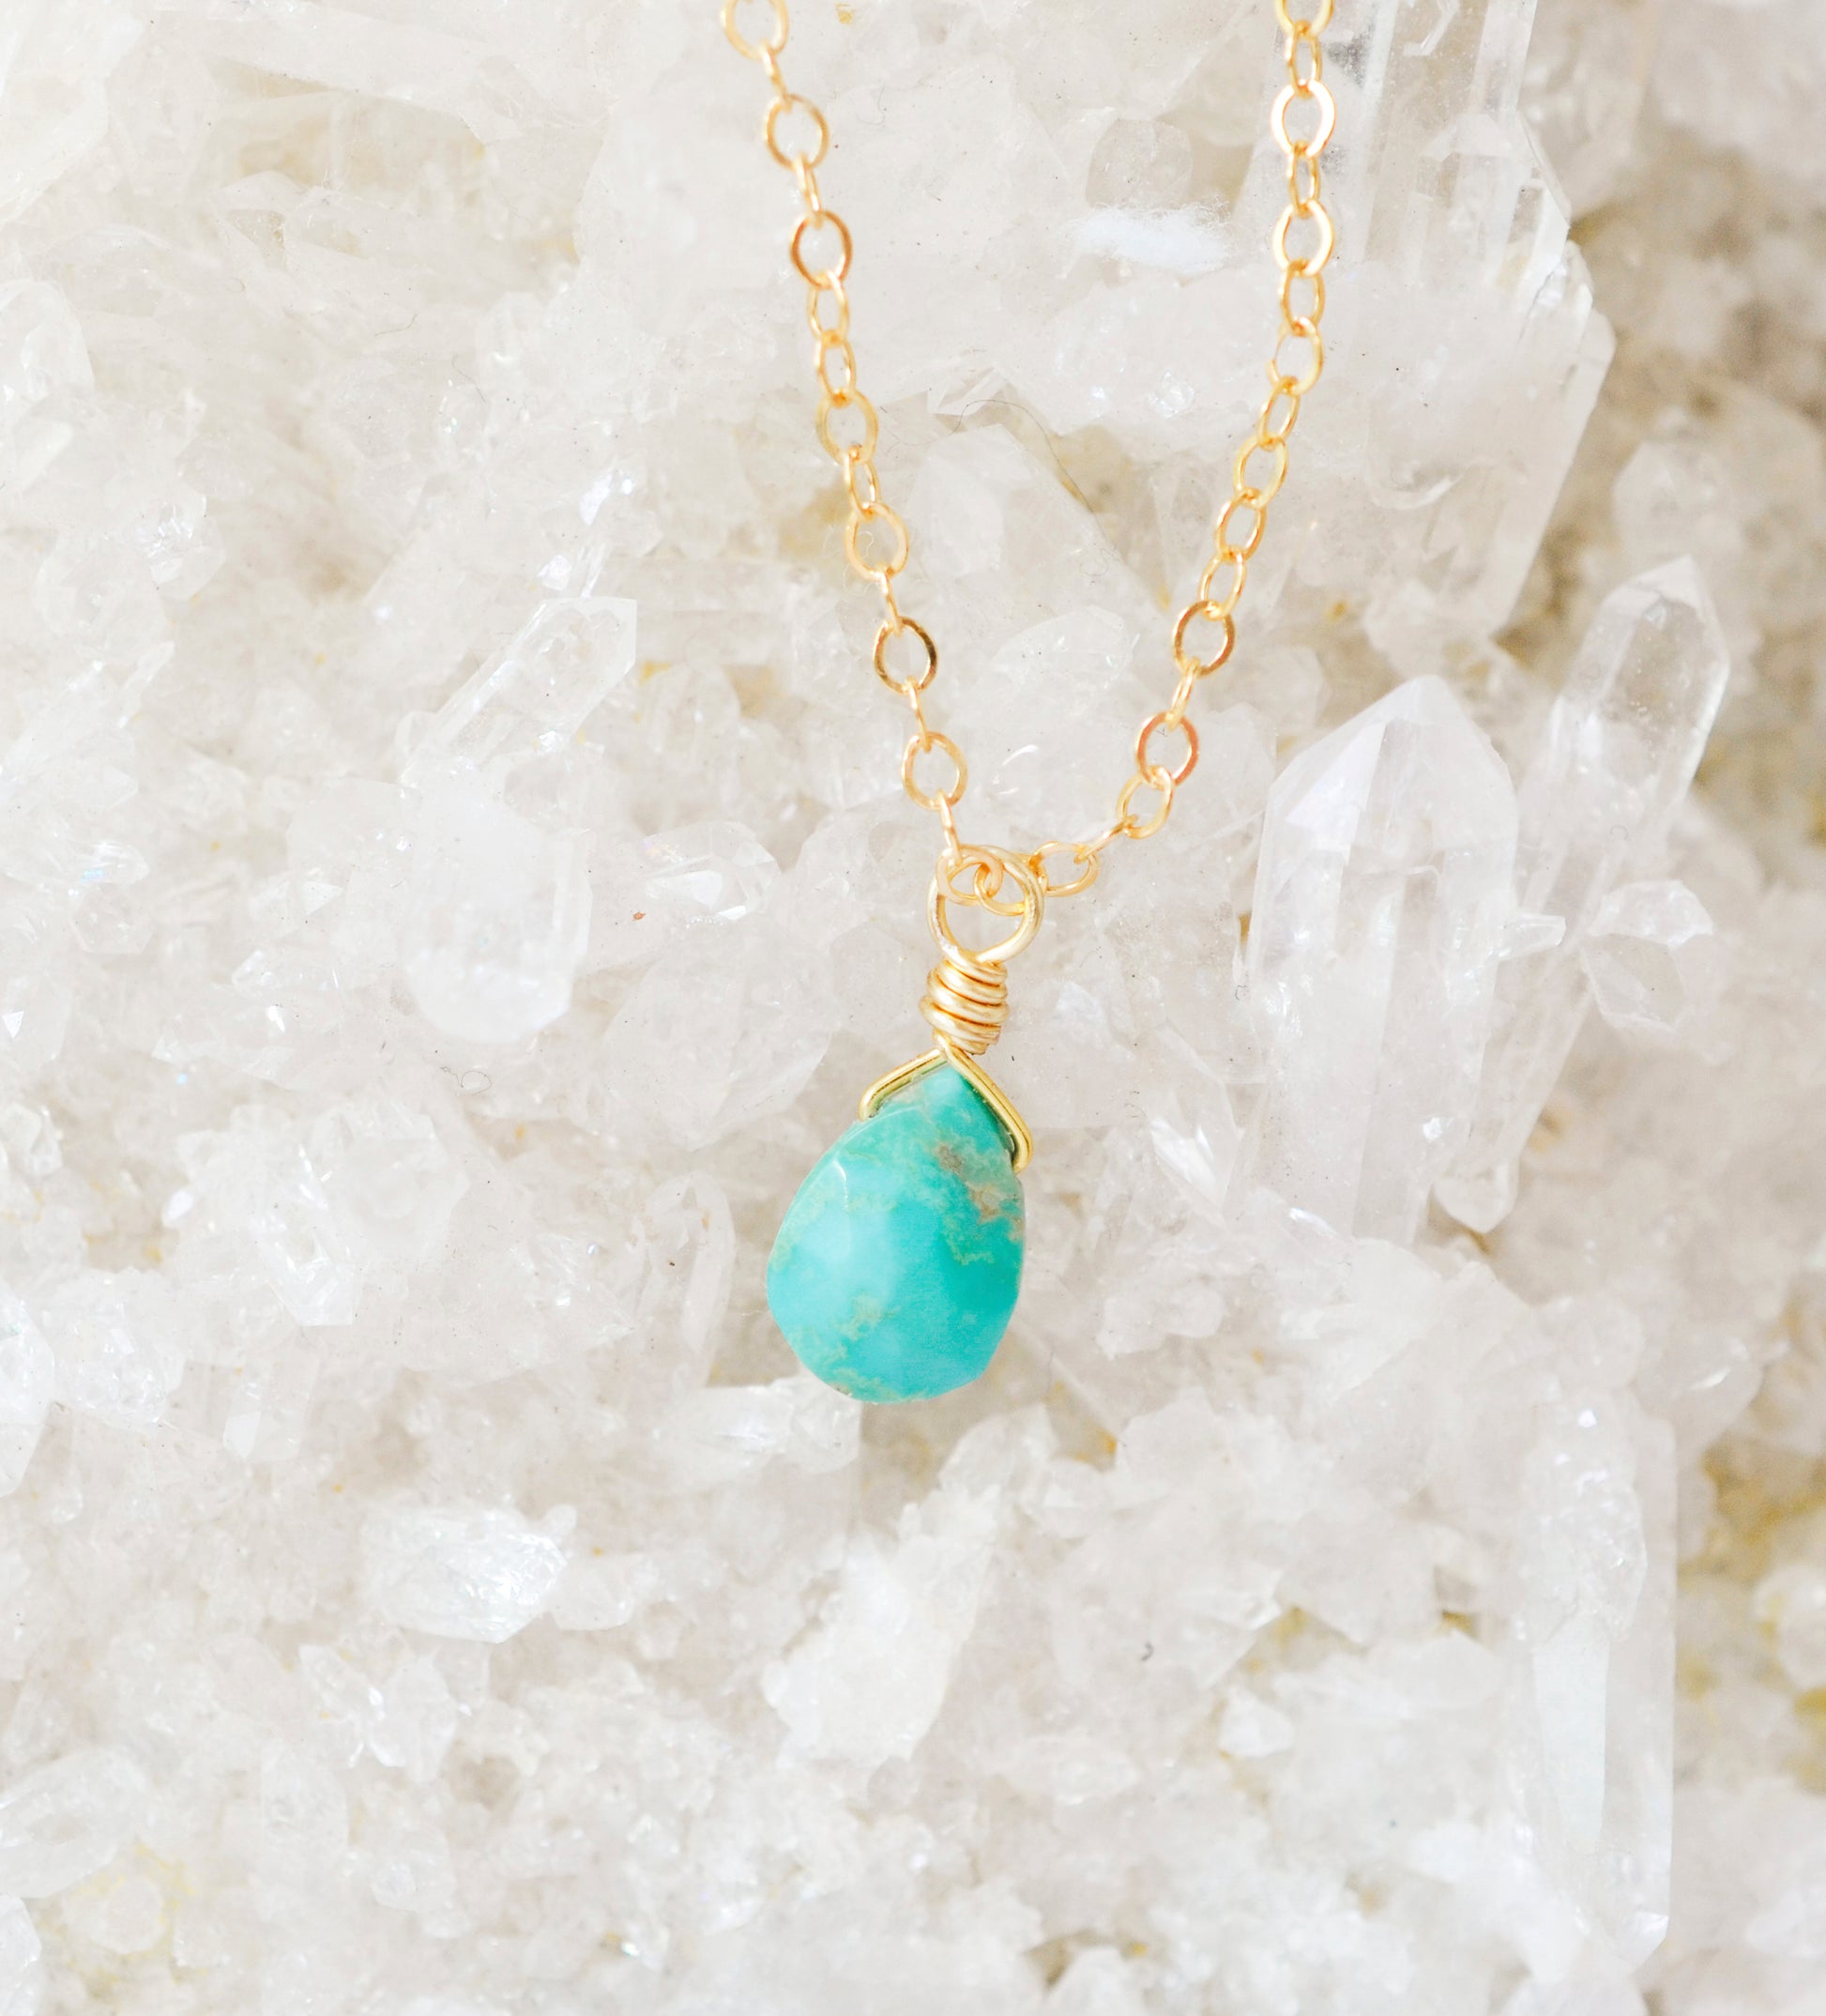 Turquoise pendant in gold.